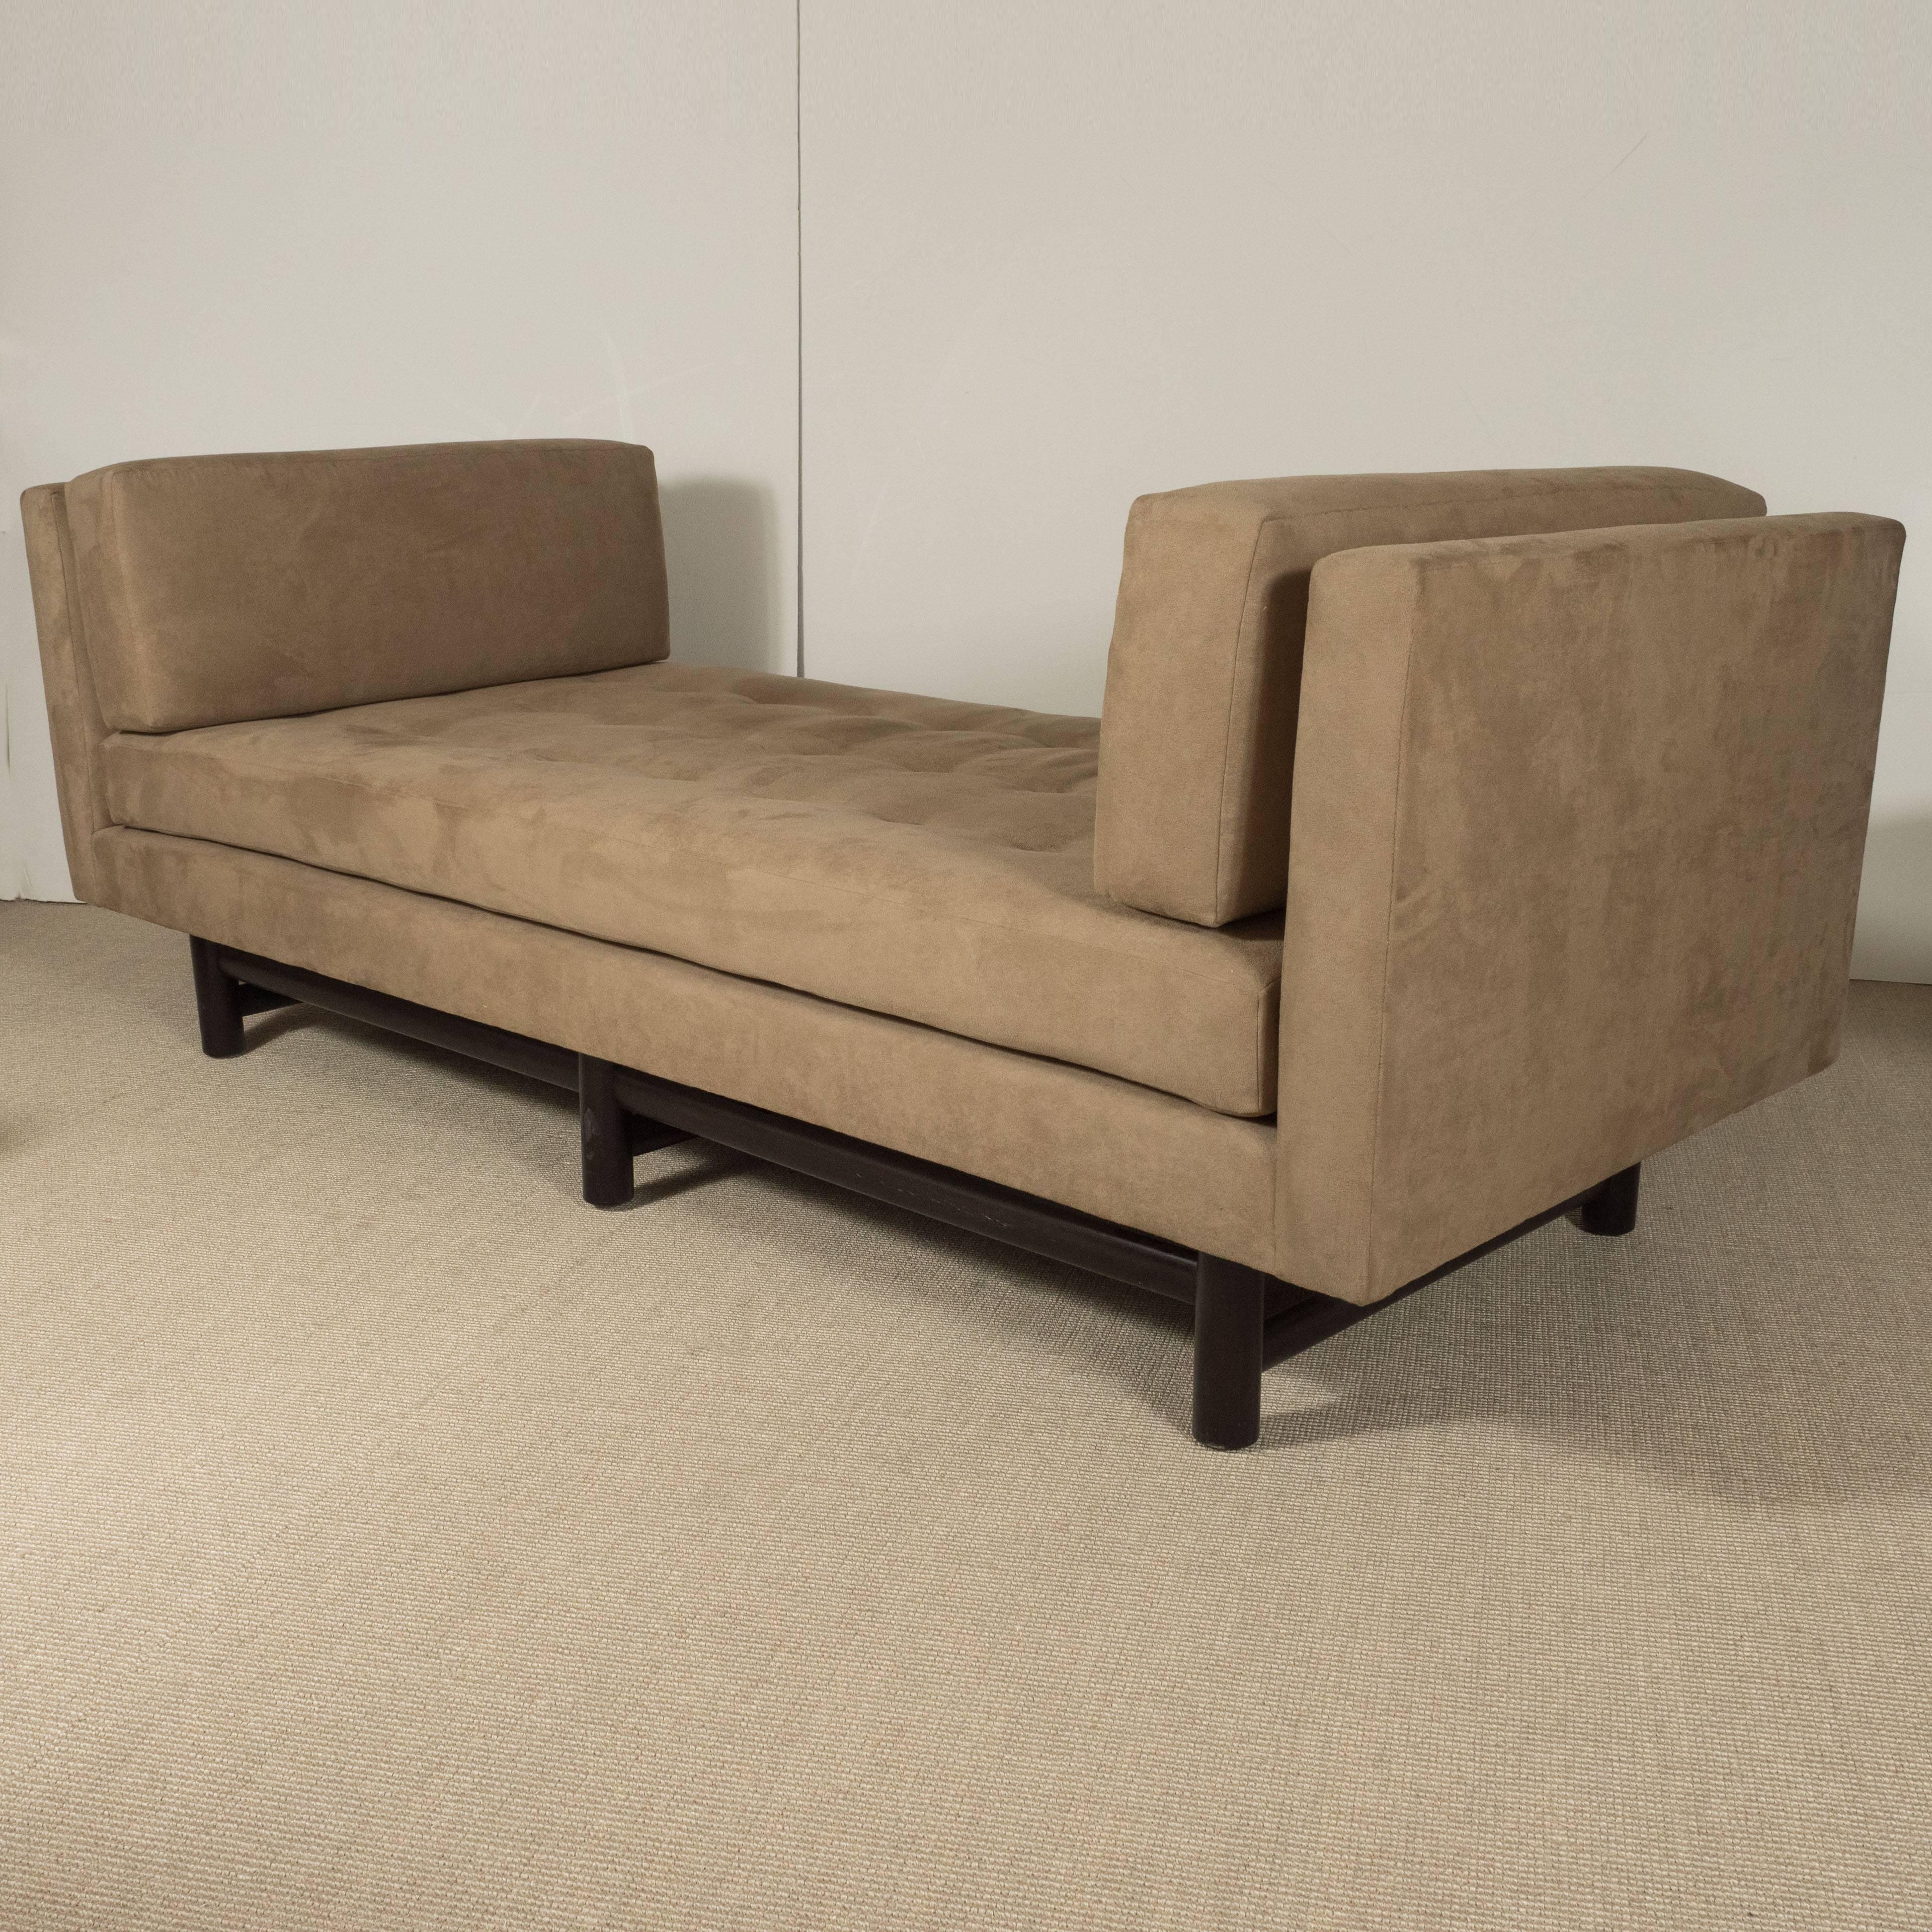 Ed Wormley for Dunbar rectangular upholstered daybed, 1950s.